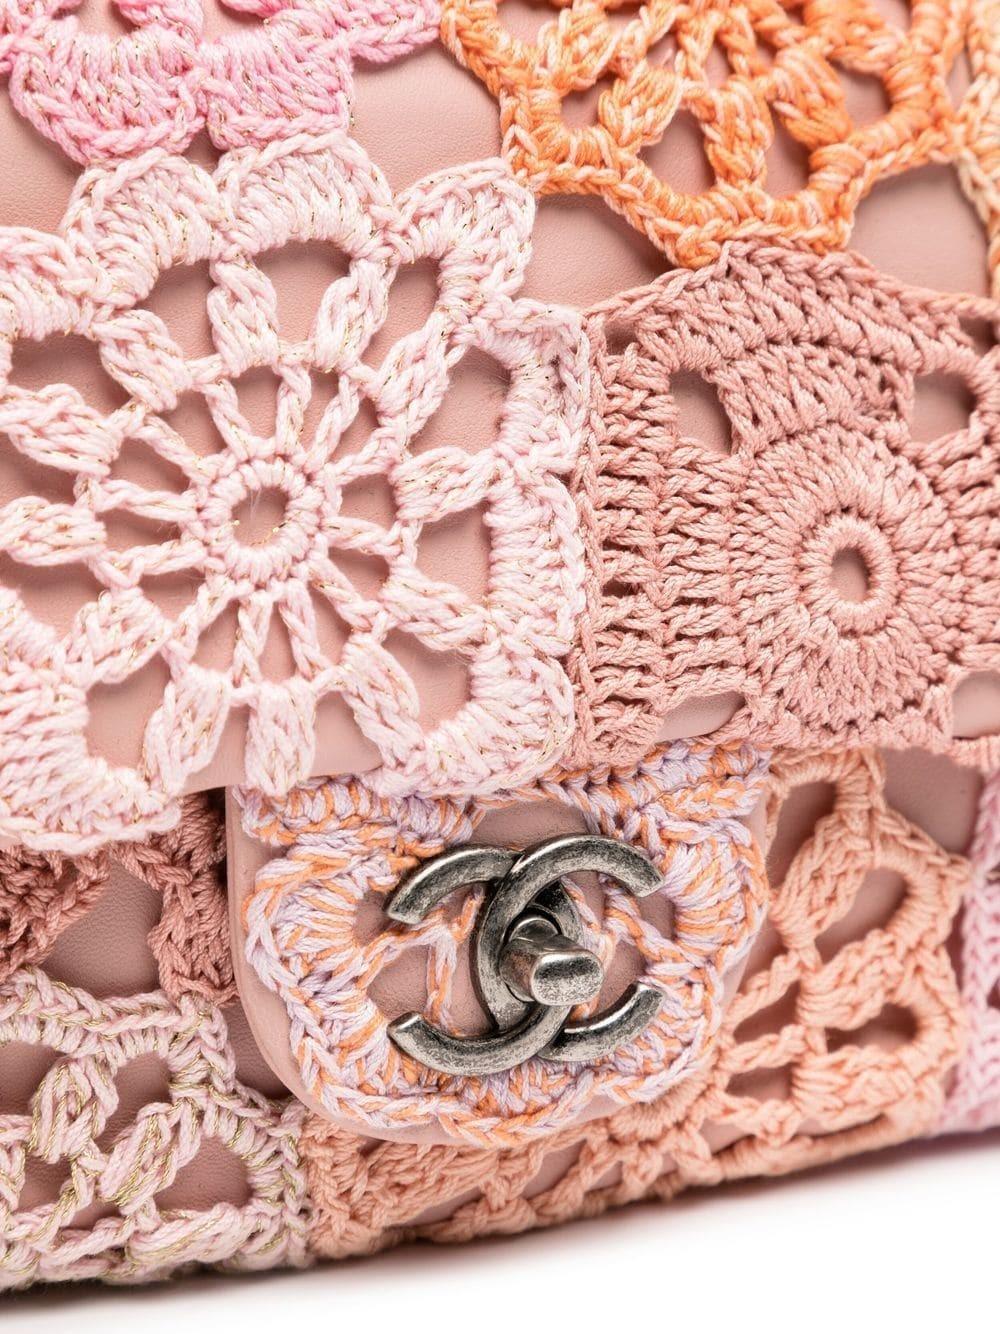 From 16C, this Chanel flap bag is a show-stopper. Made with soft pink leather and an intricate crochet flower outside trim, this is a light-hearted twist on the classic flap. Chanel cruise collections contain some of the most collectable Chanel